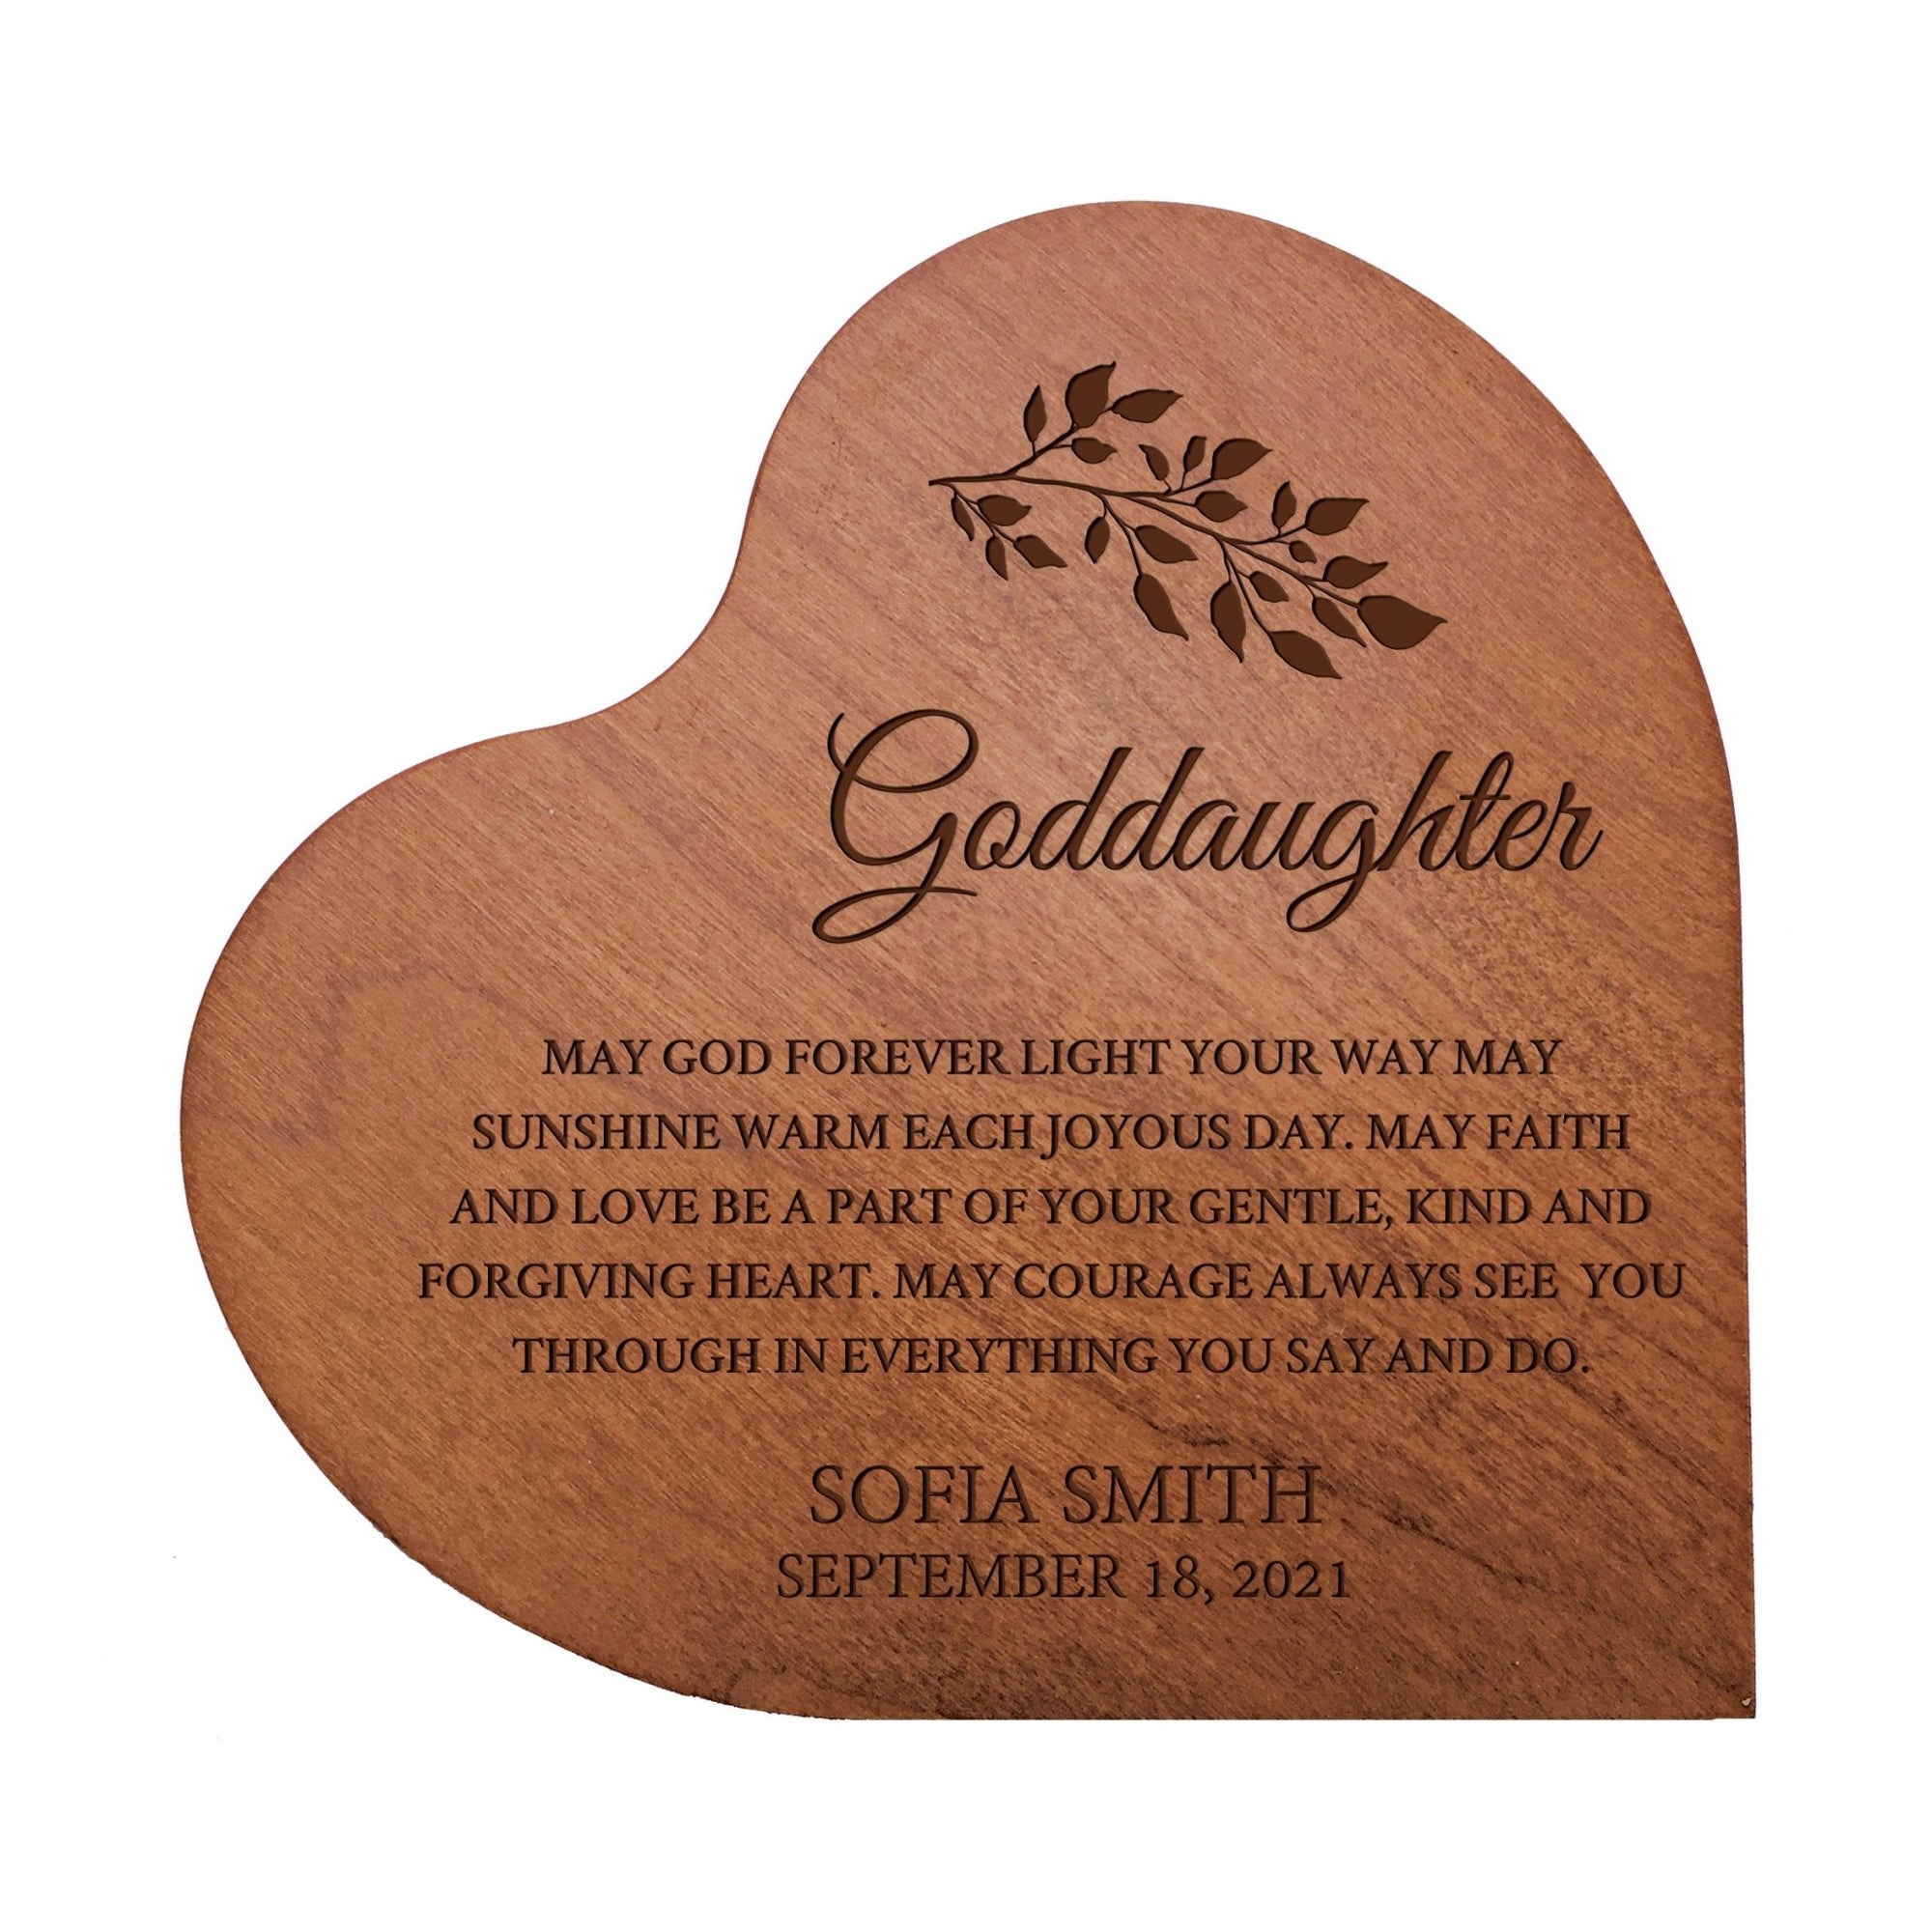 Personalized Modern Goddaughter’s Love Solid Wood Heart Decoration With Inspirational Verse Keepsake Gift 5x5.25 - May God Forever - LifeSong Milestones